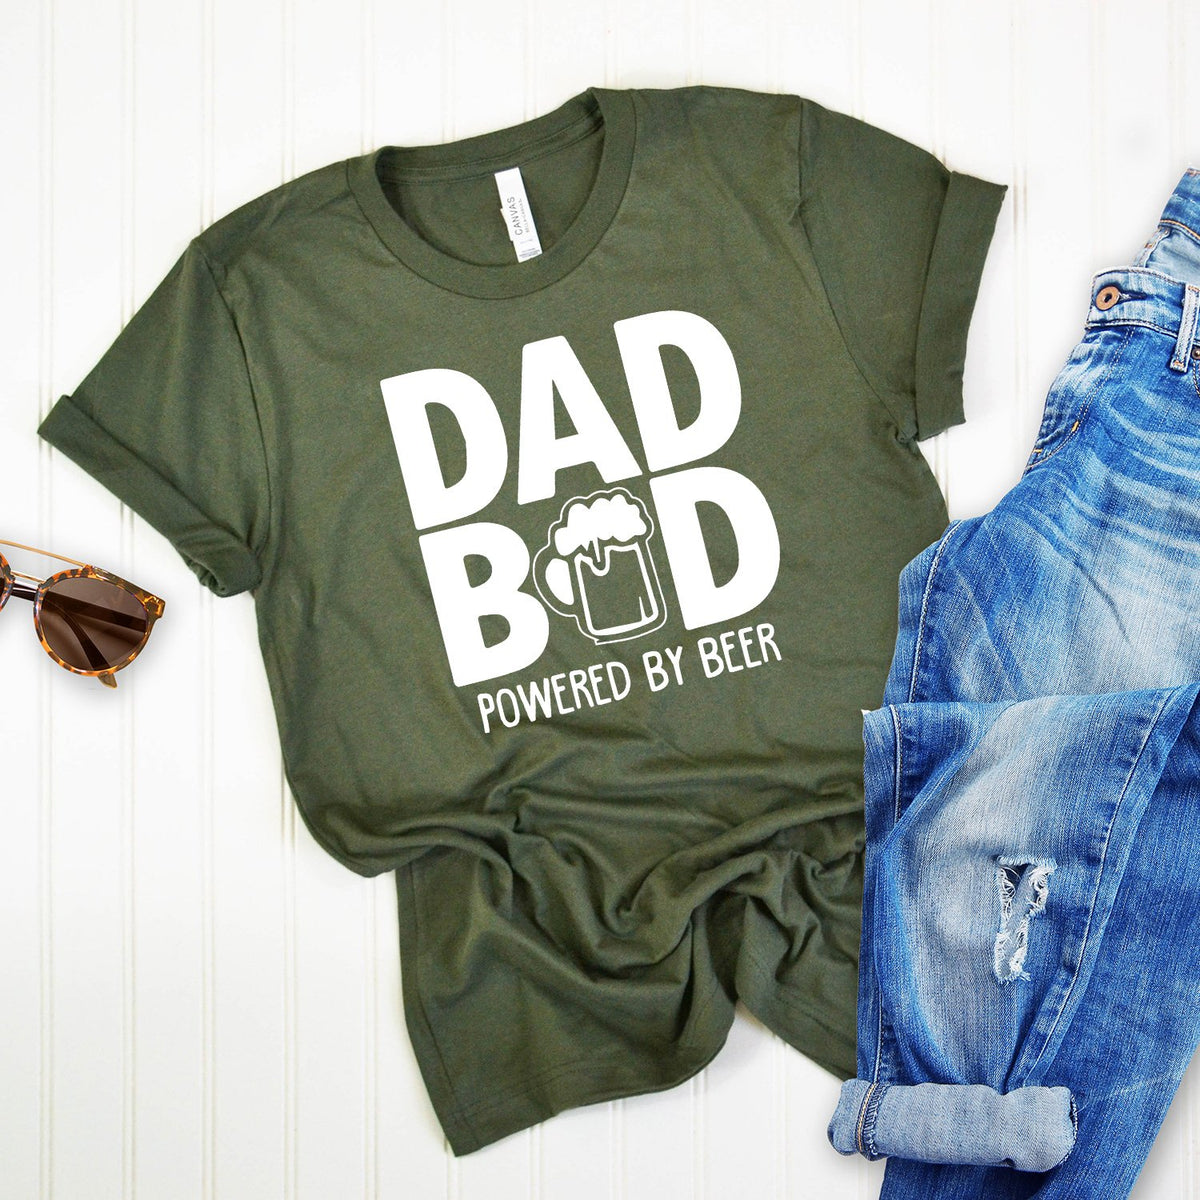 Dad Bod Powered By Beer - Short Sleeve Tee Shirt